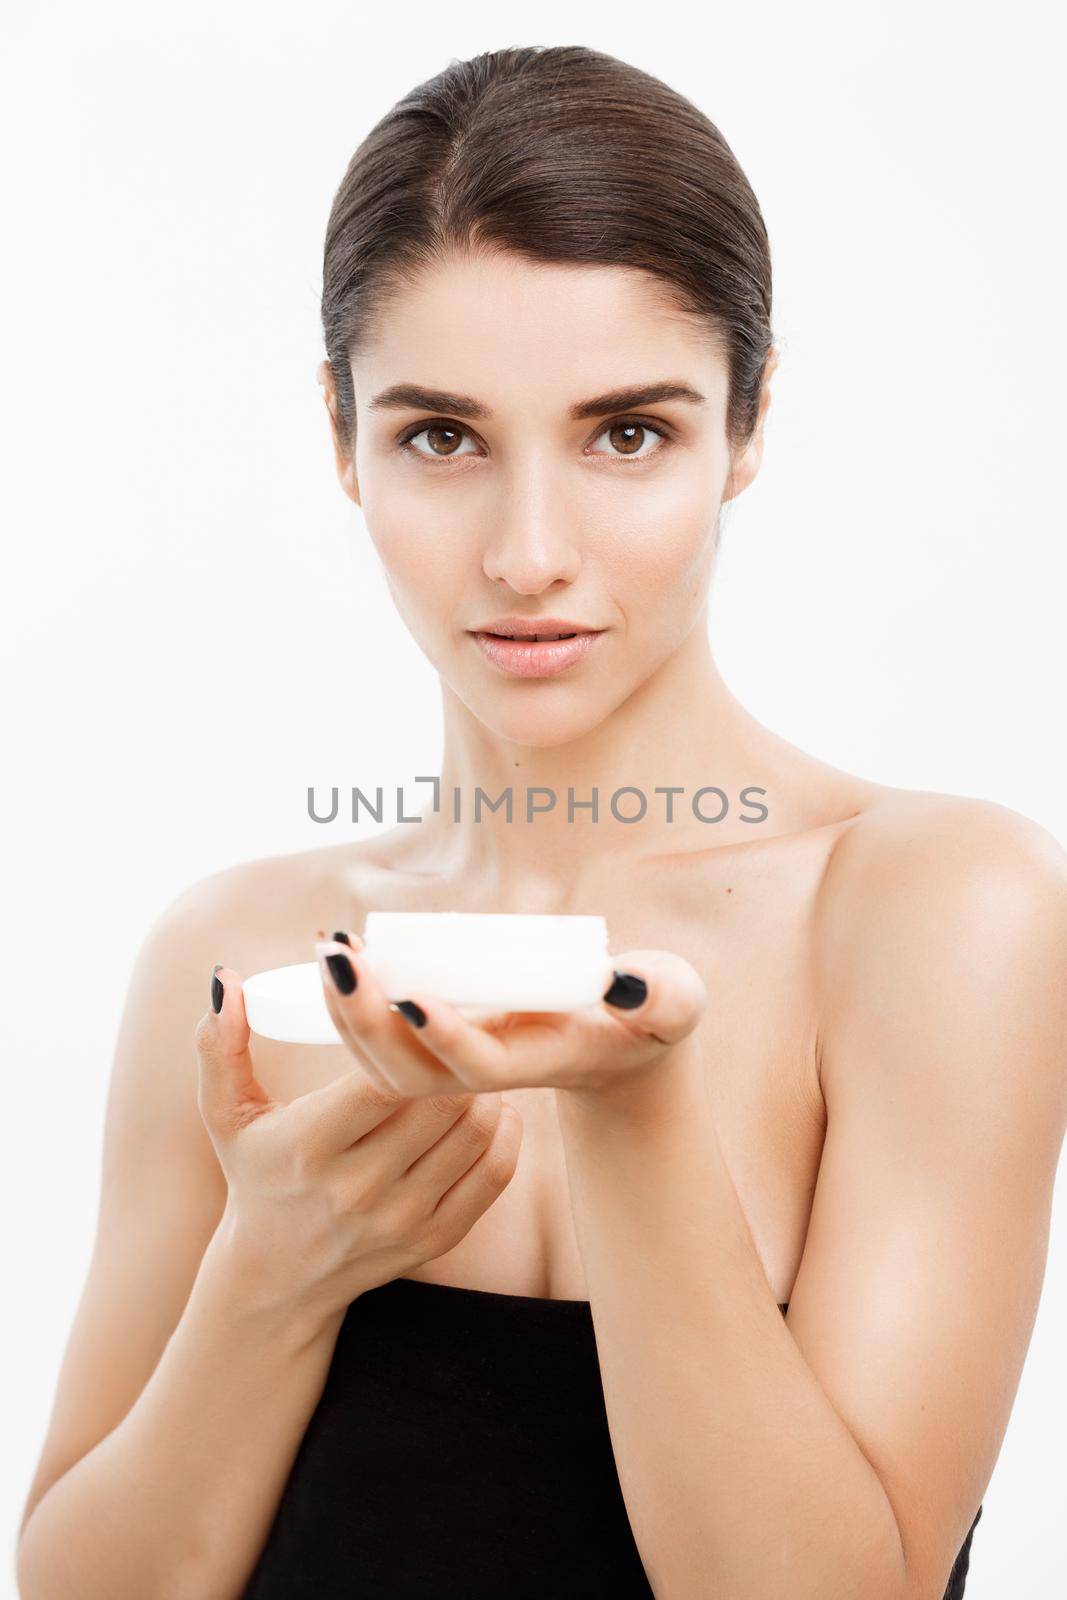 Beauty Youth Skin Care Concept - Close up Beautiful Caucasian Woman Face Portrait presenting cream jar for skin care over white background